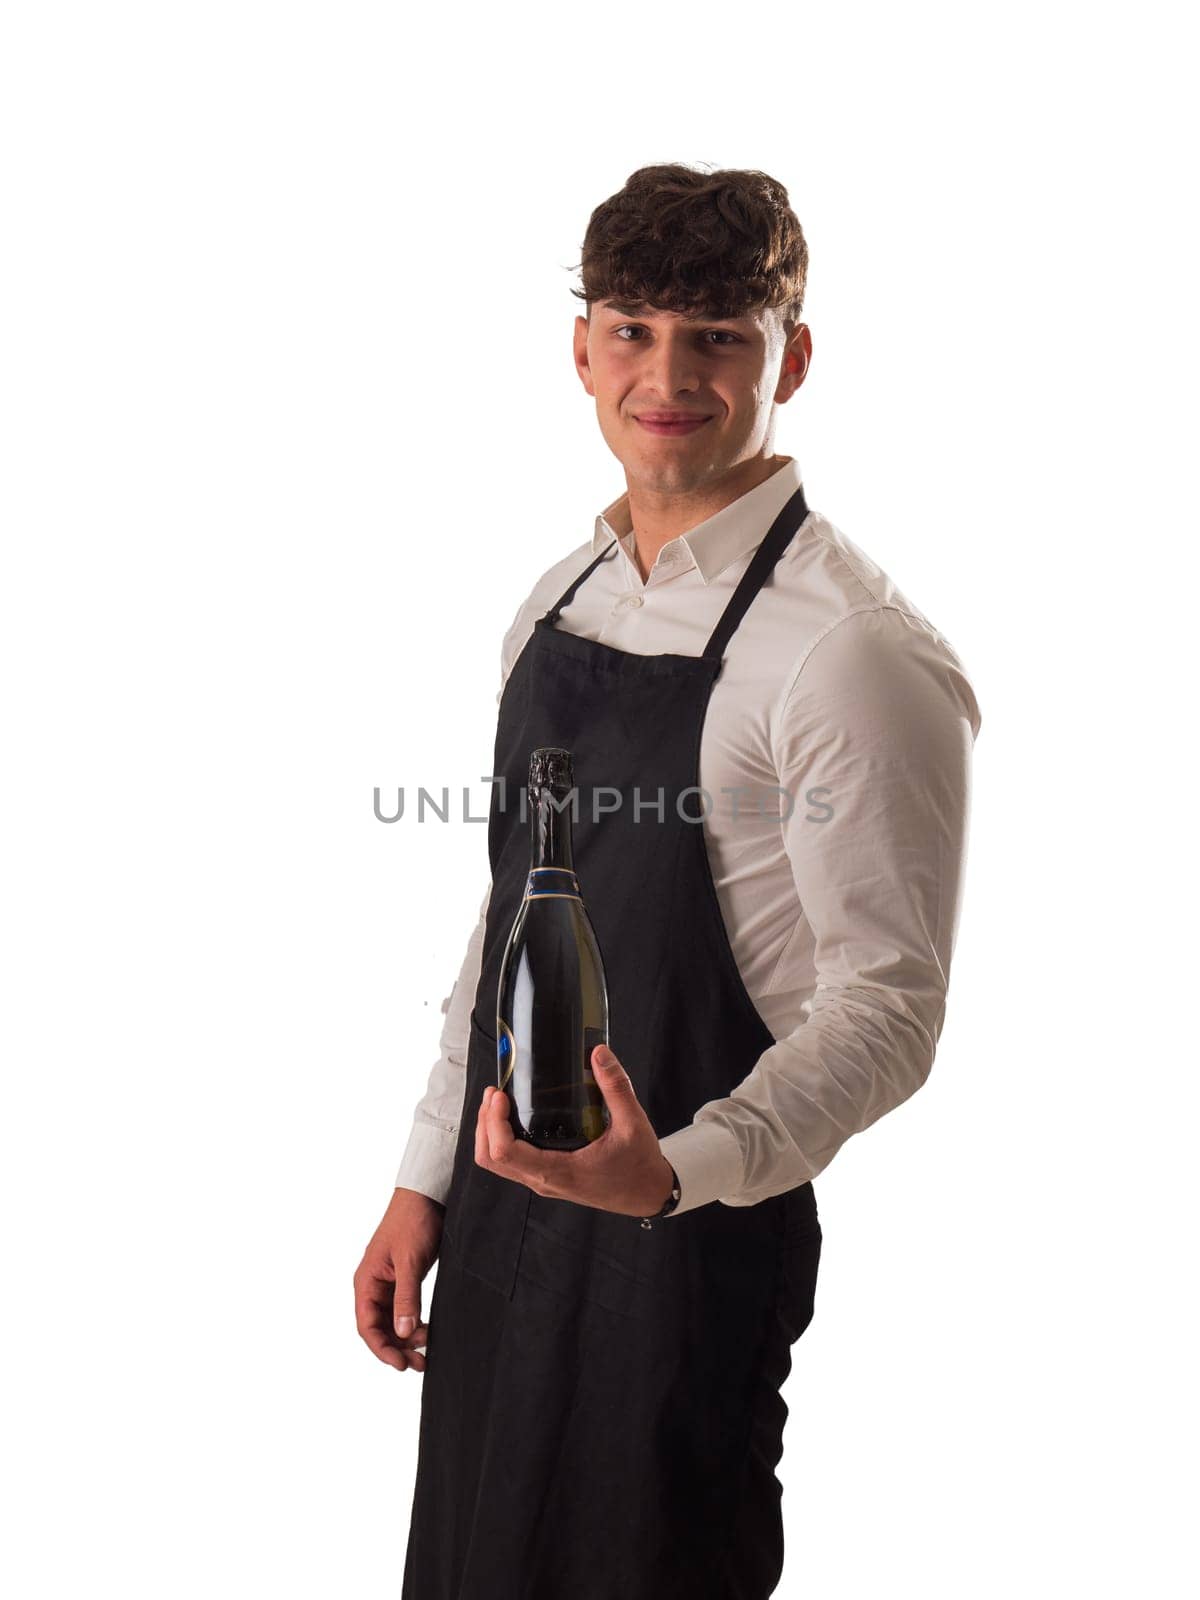 The Wine Connoisseur: A Man in an Apron Holding a Bottle of Wine by artofphoto